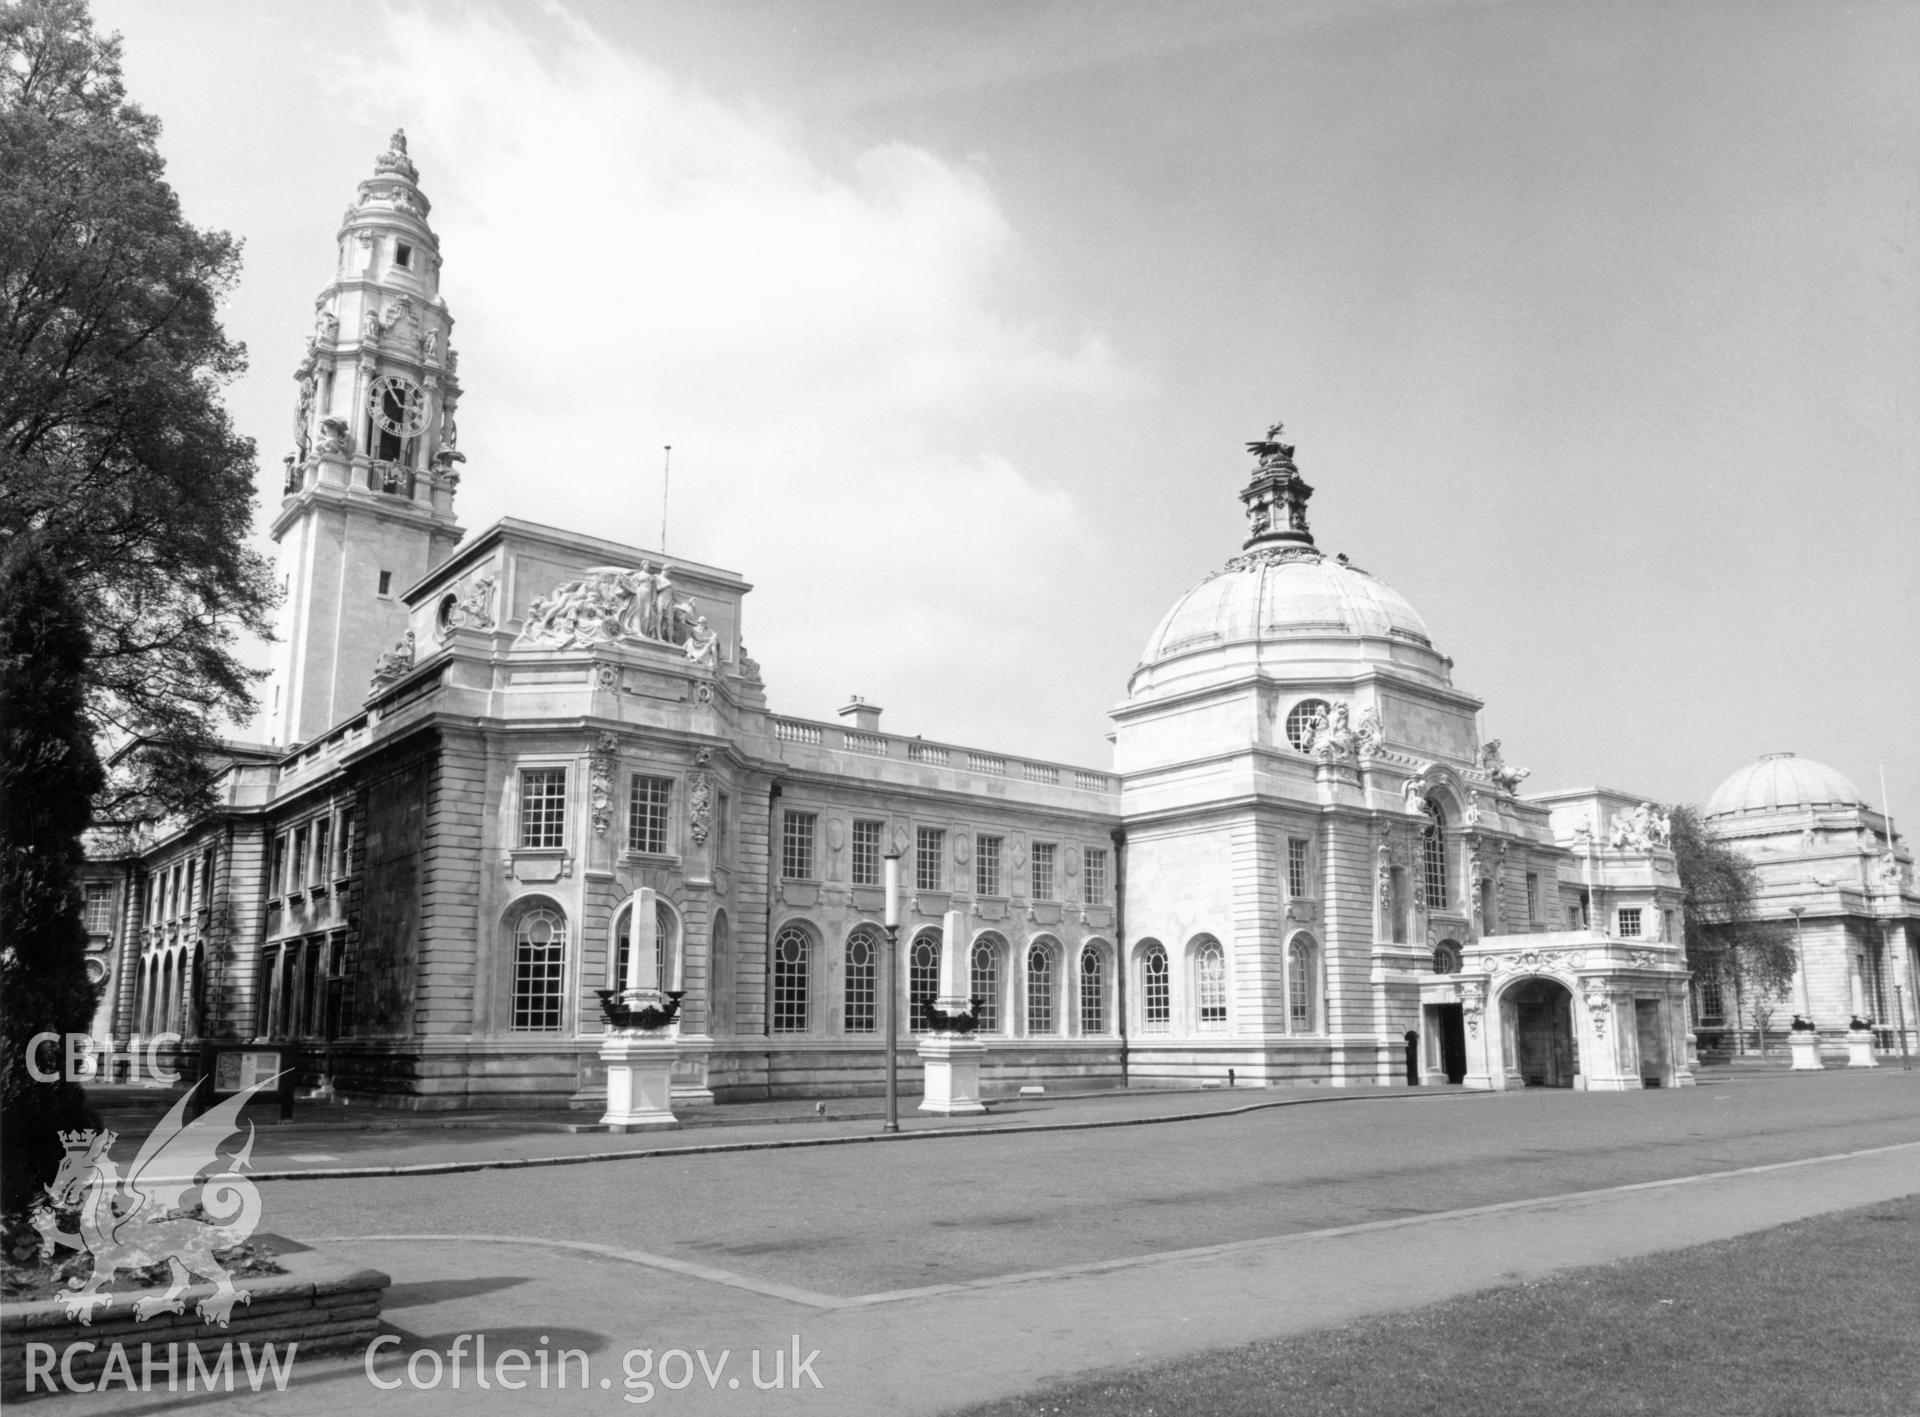 1 b/w print showing view of Cardiff City Hall; collated by the former Central Office of Information.